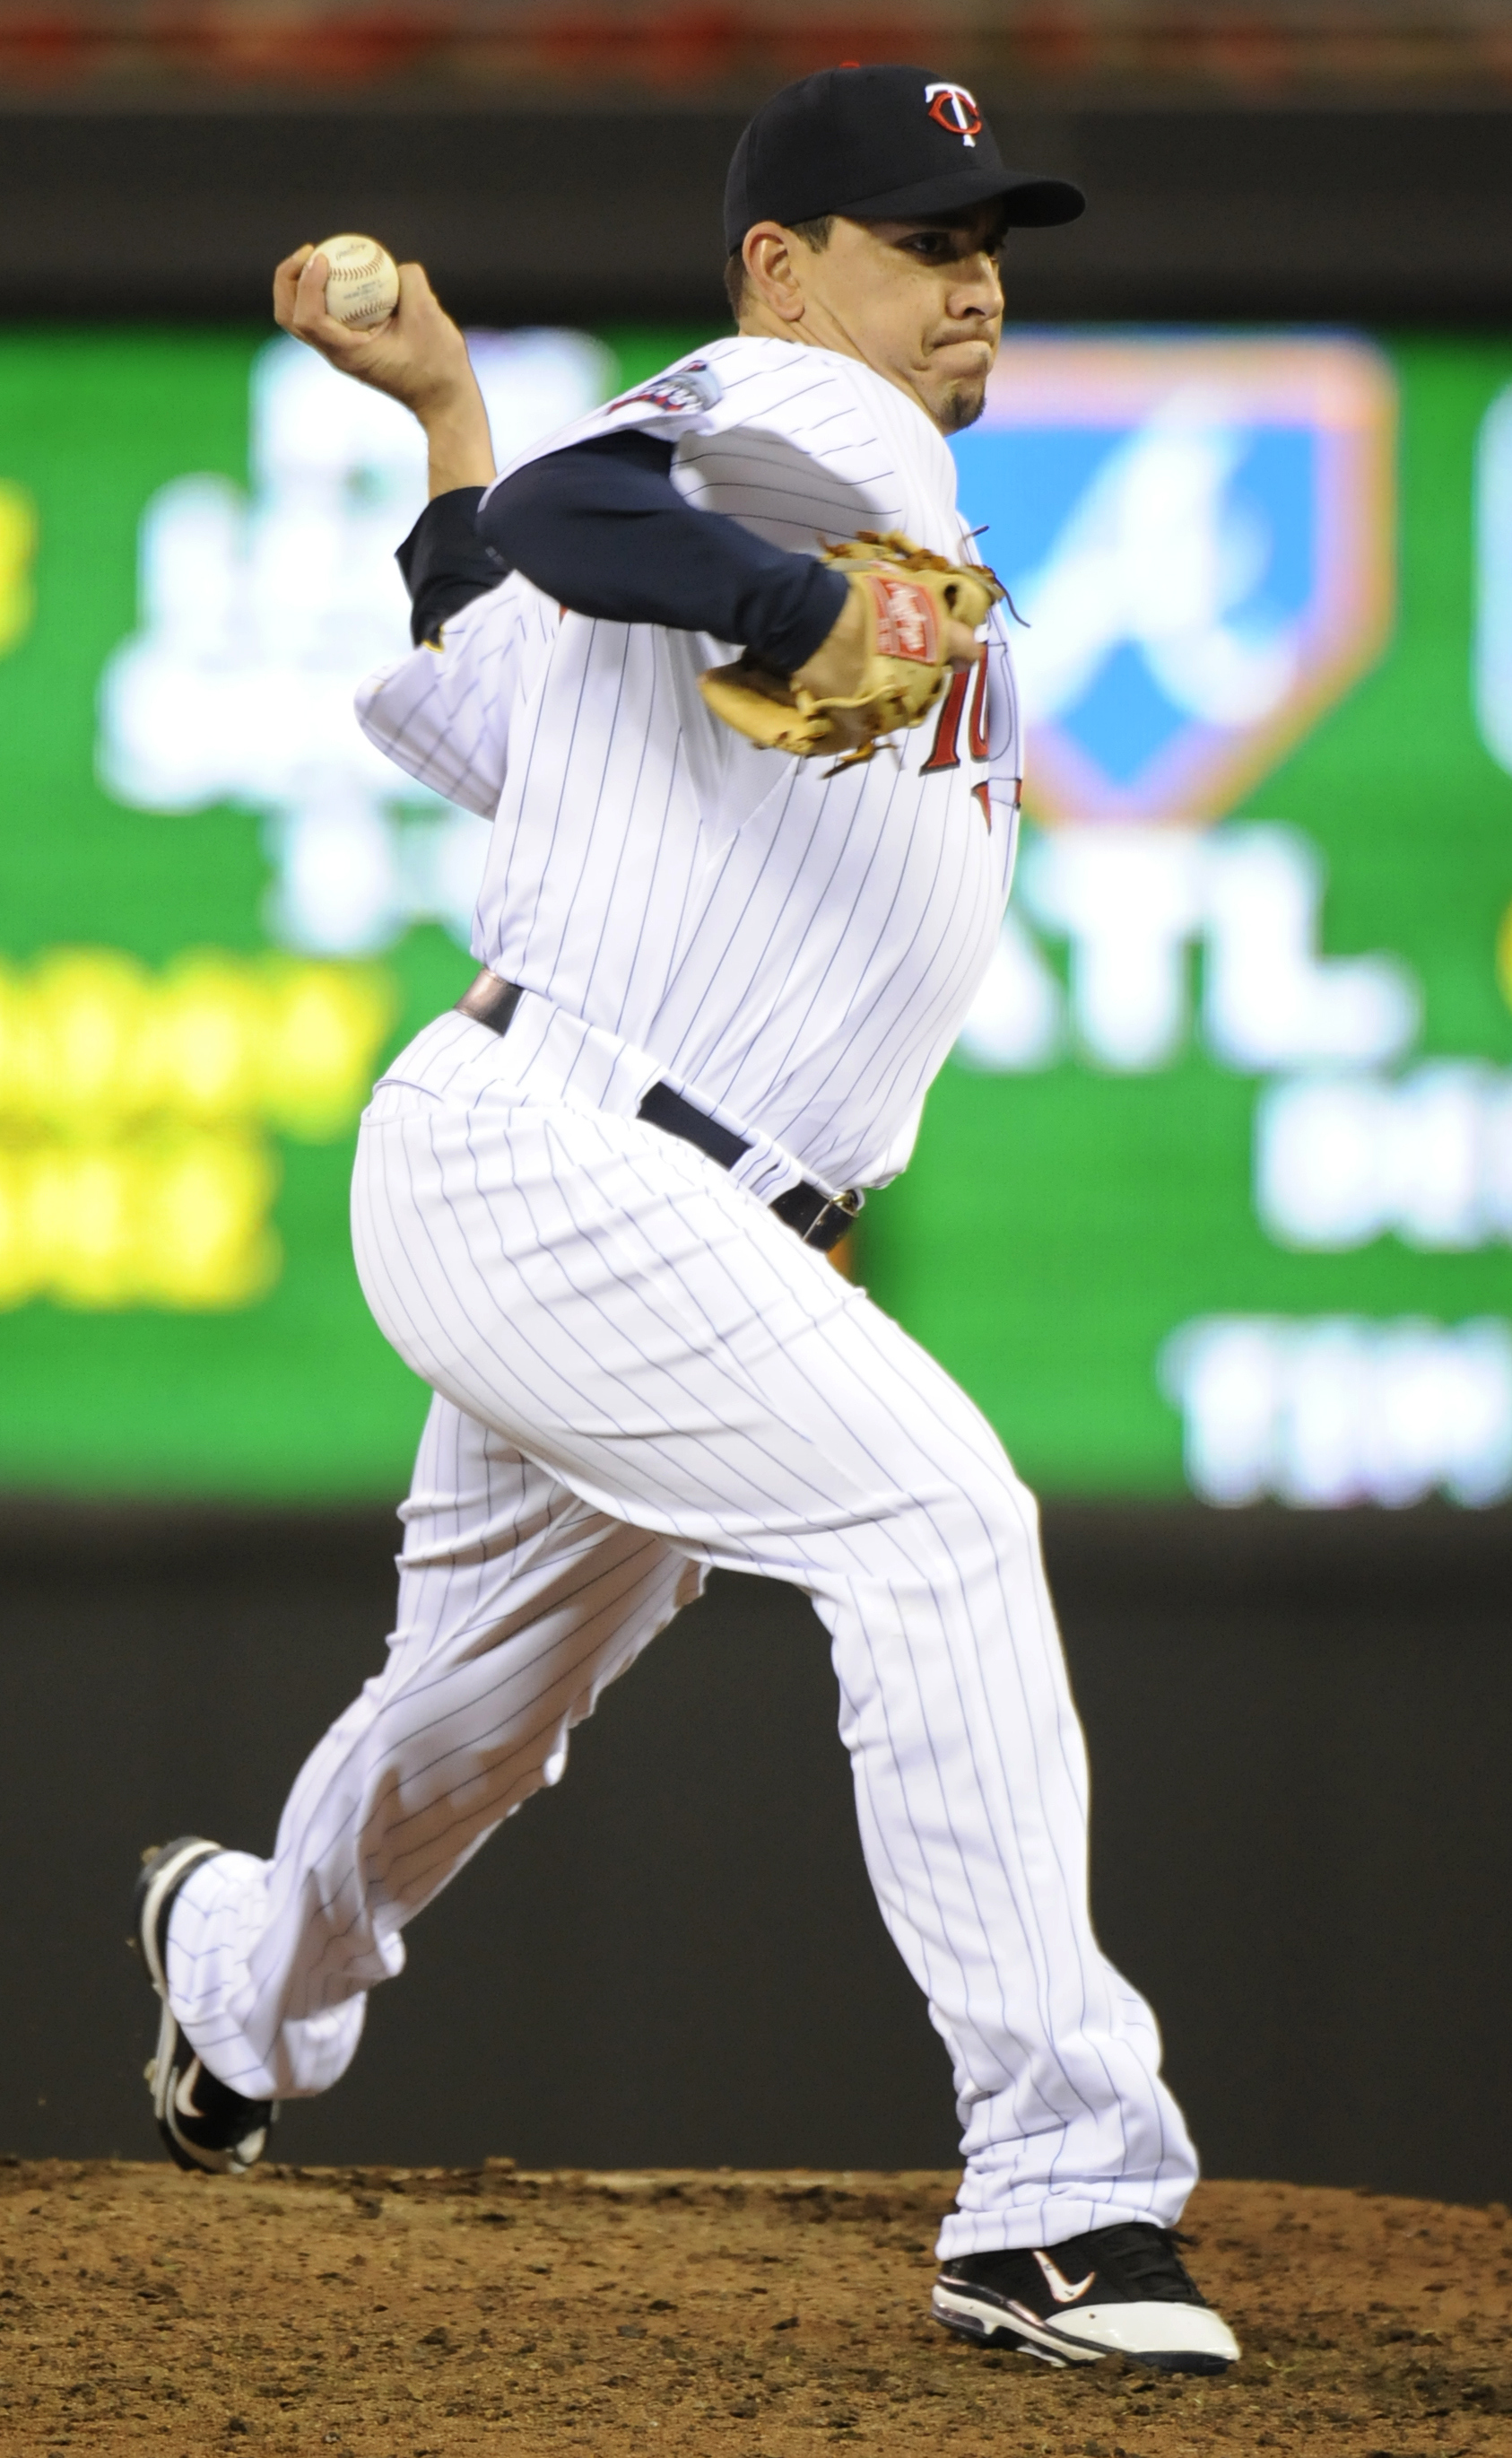 Fuentes could become a major asset to the Pinstripes in 2011.